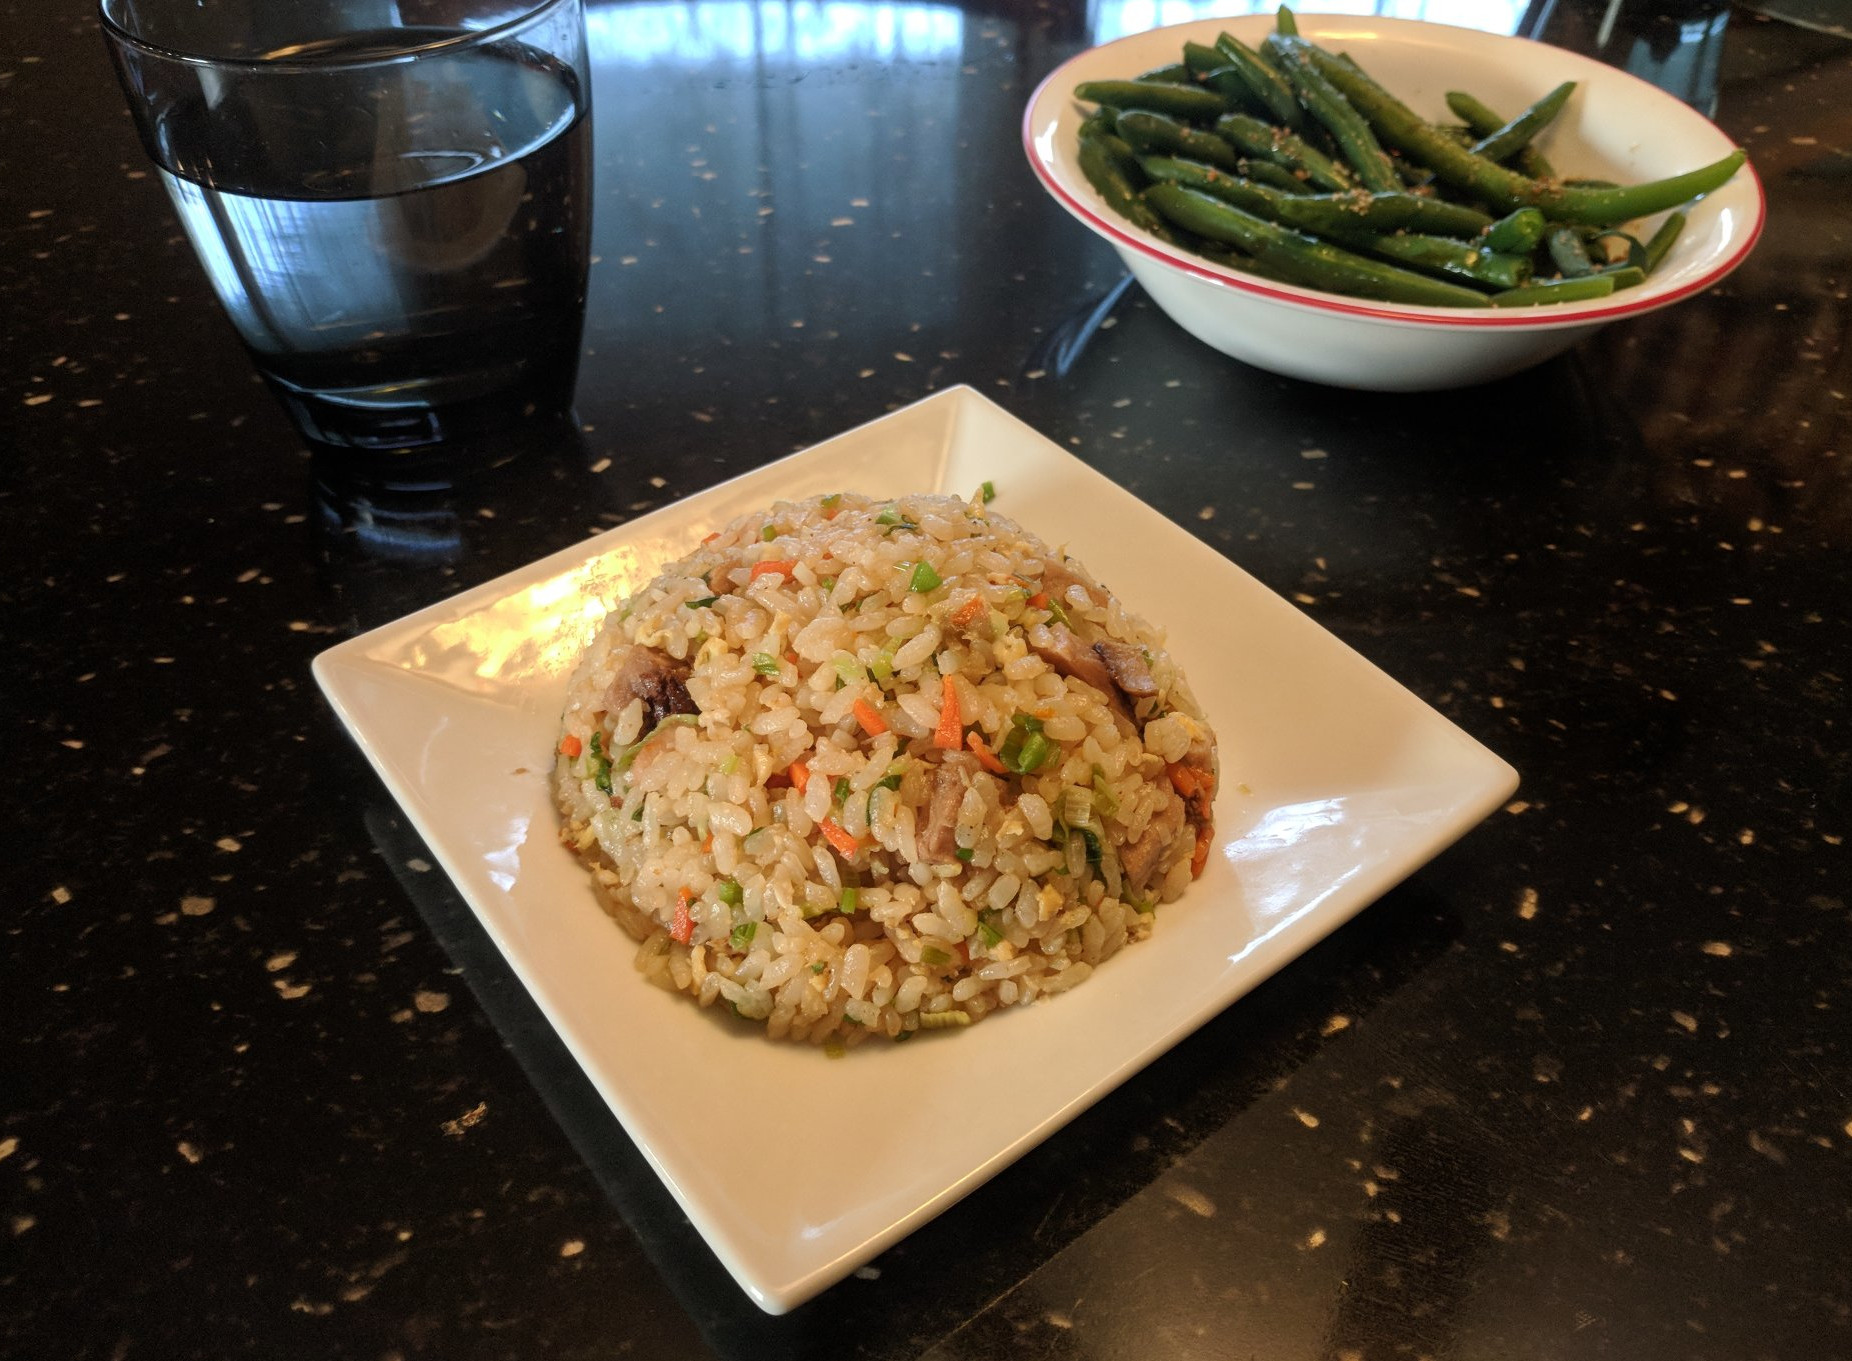 An Attempt at Cooking: Chaahan (Fried Rice)